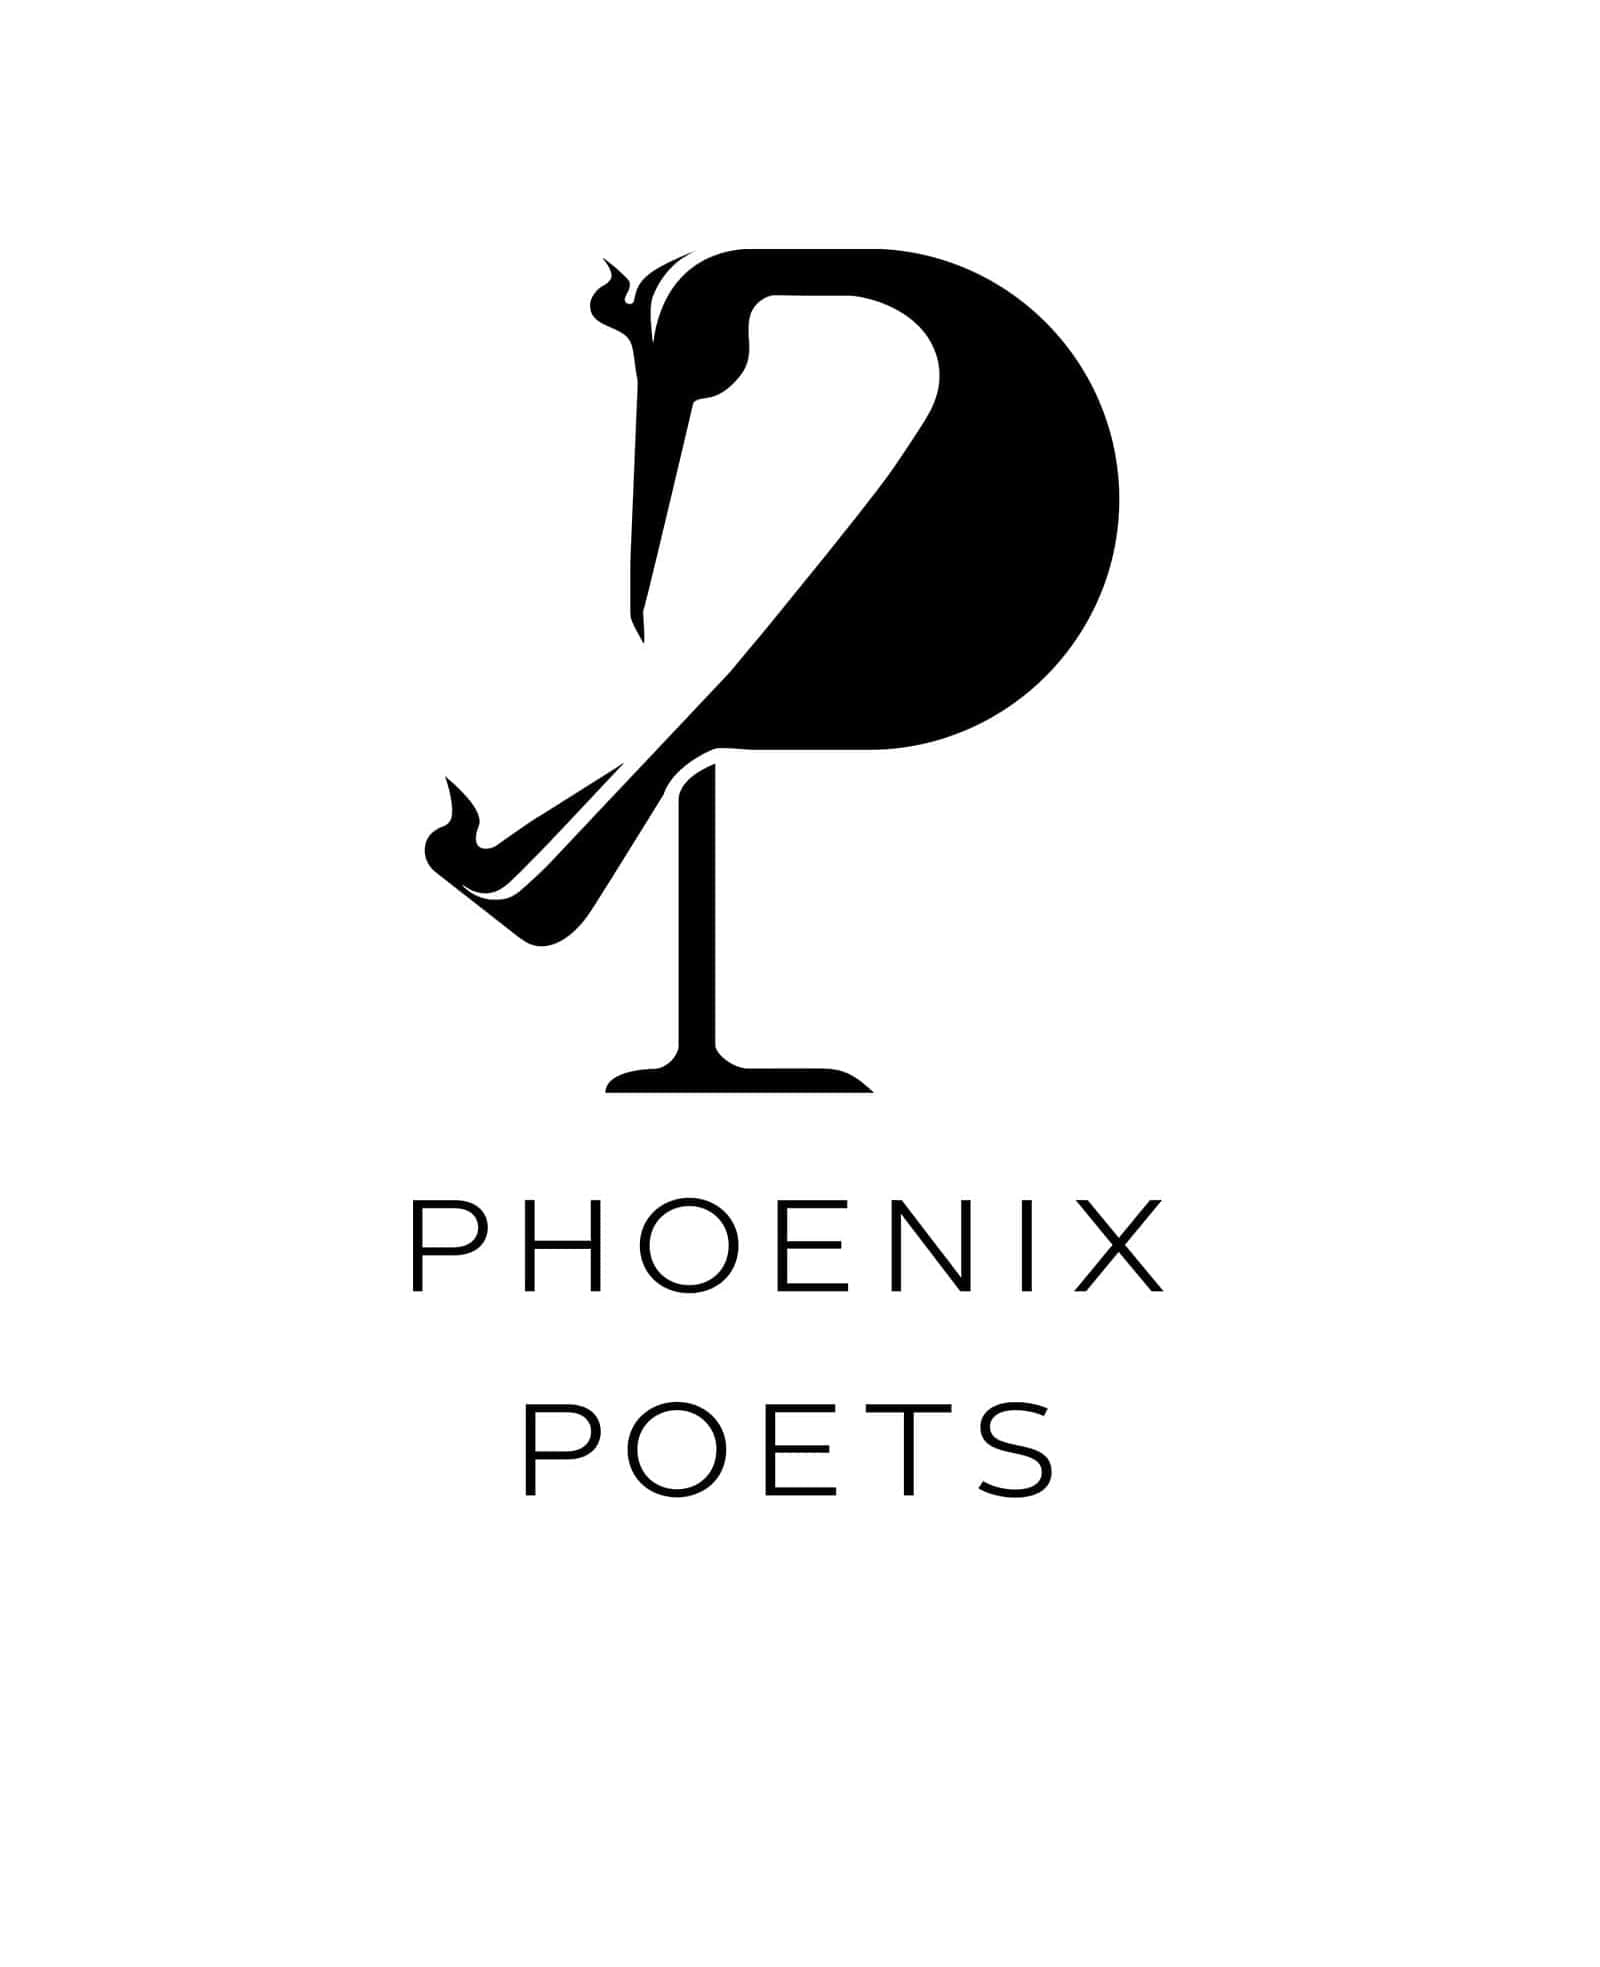 Cover of PHOENIX POETS—SERIES EDITOR by Srikanth Reddy